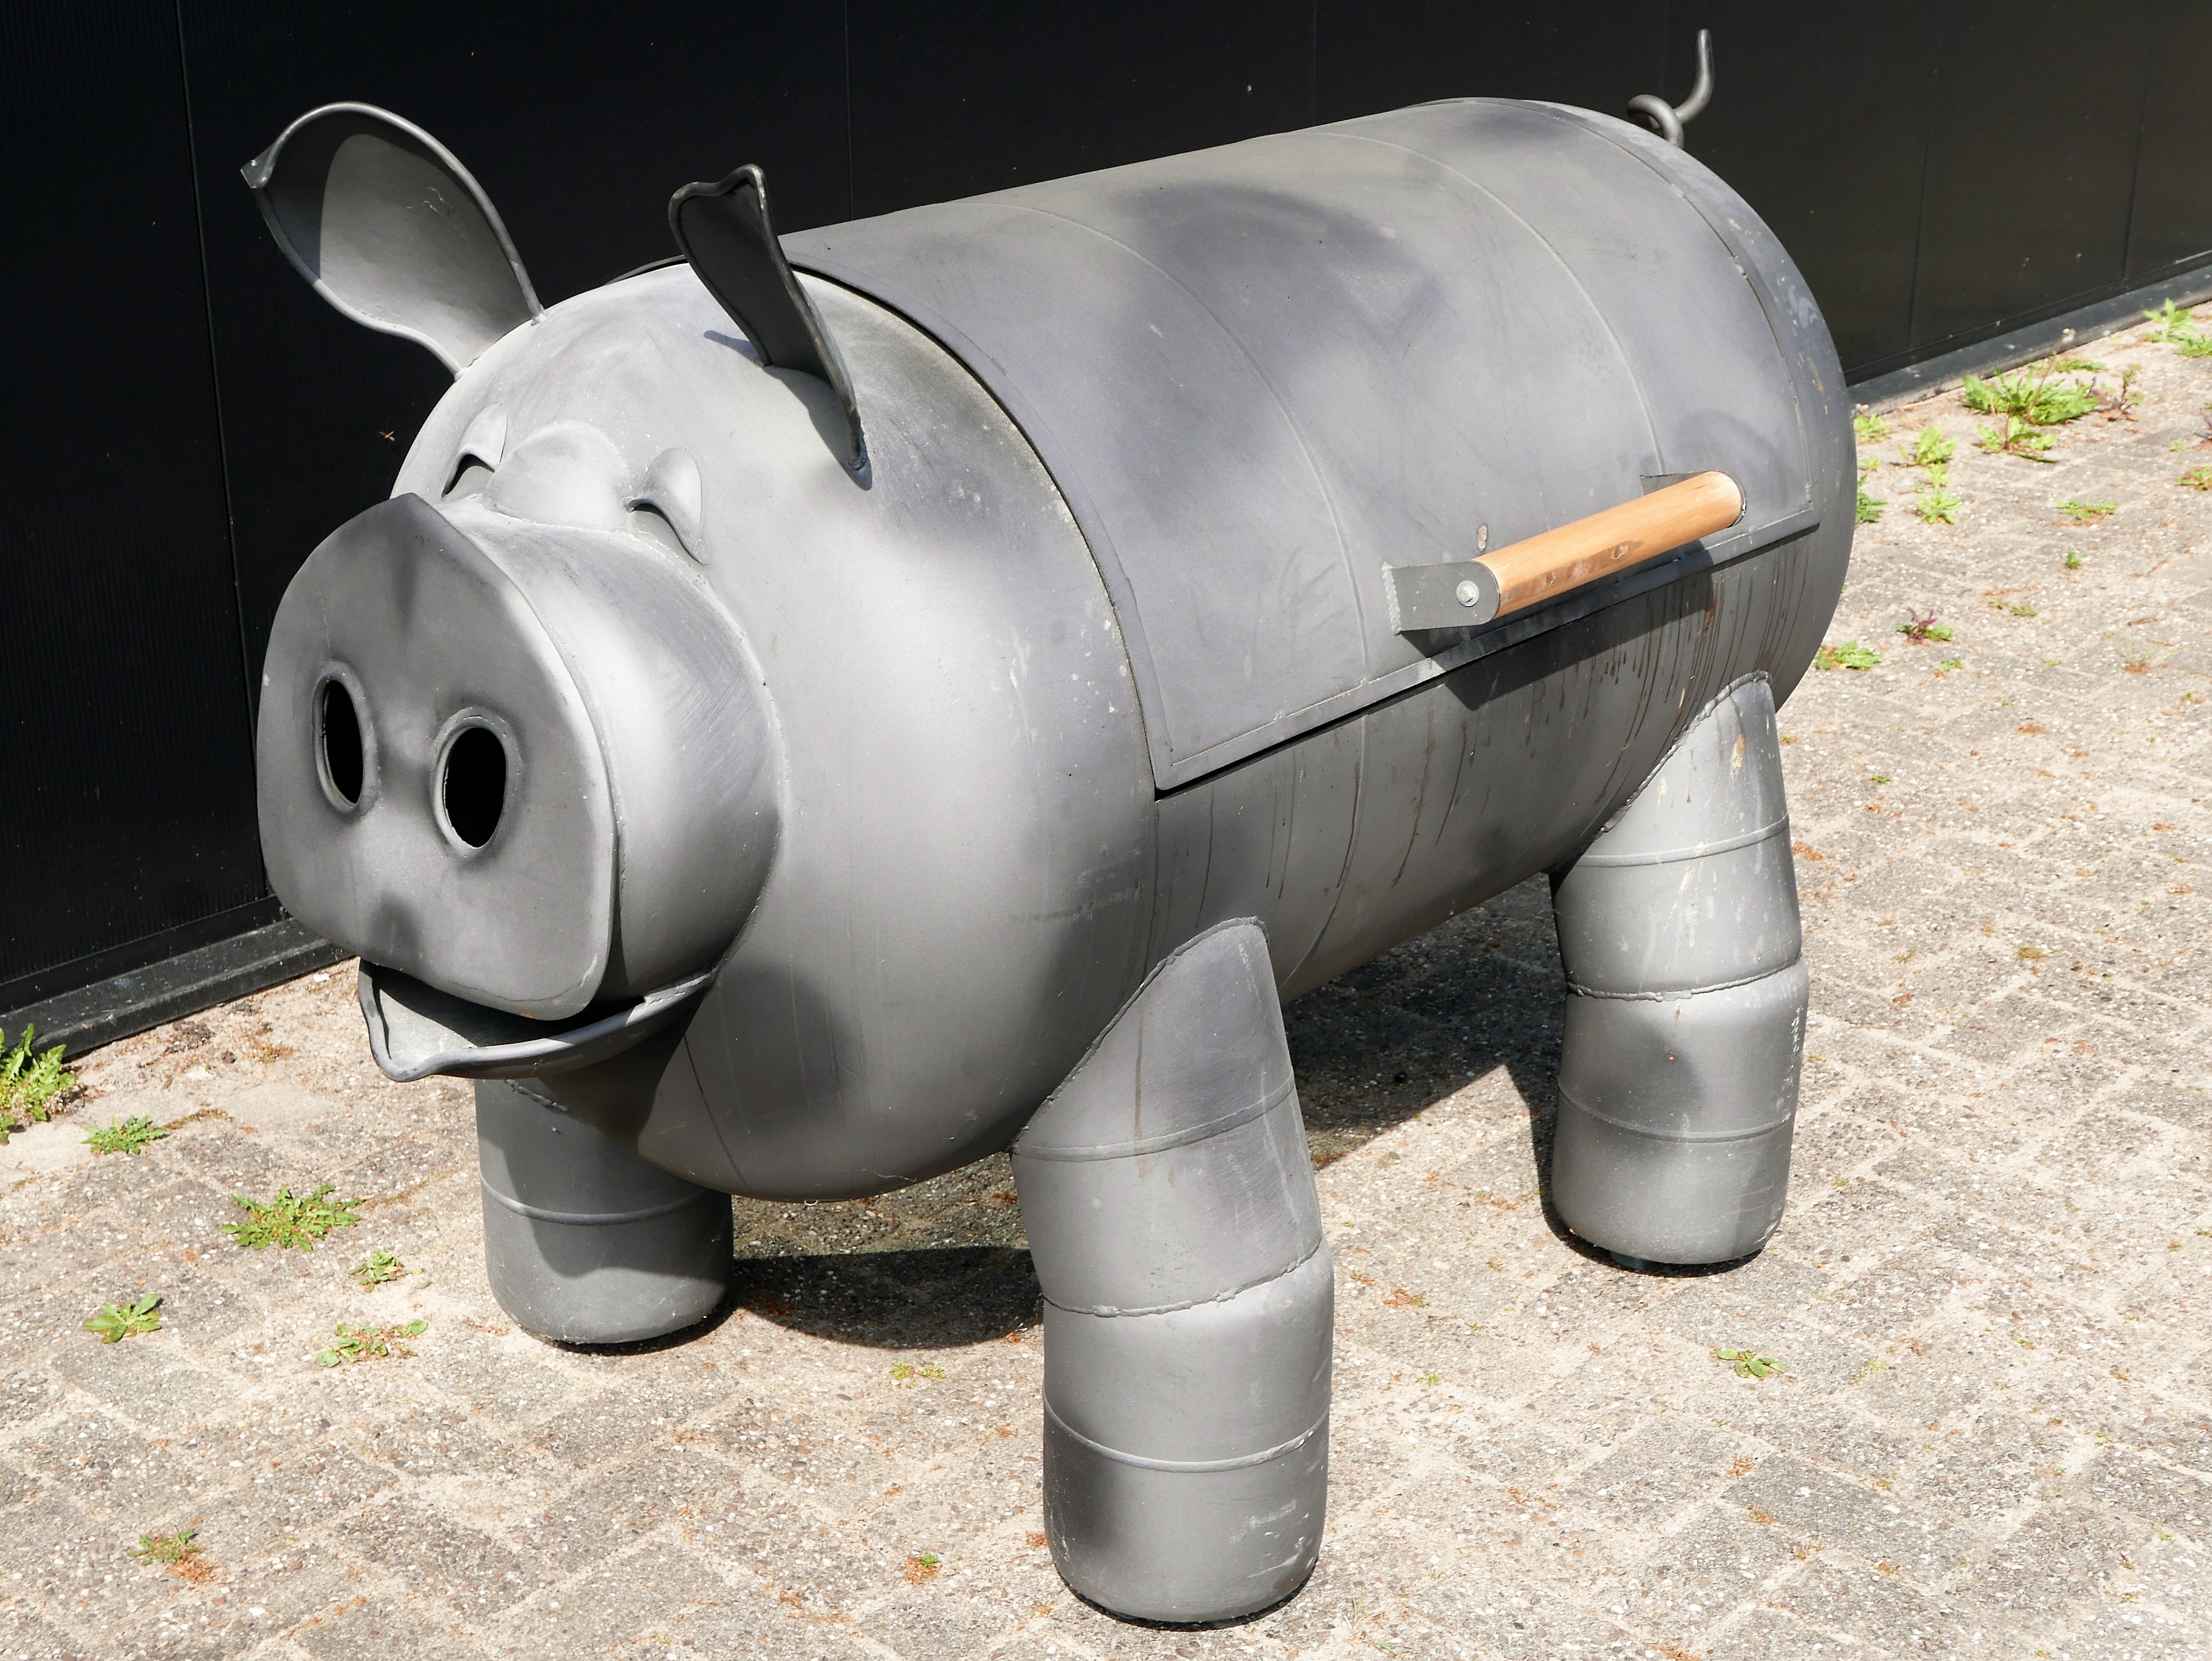 Pigbecue, stoere barbeque in varkensvorm 